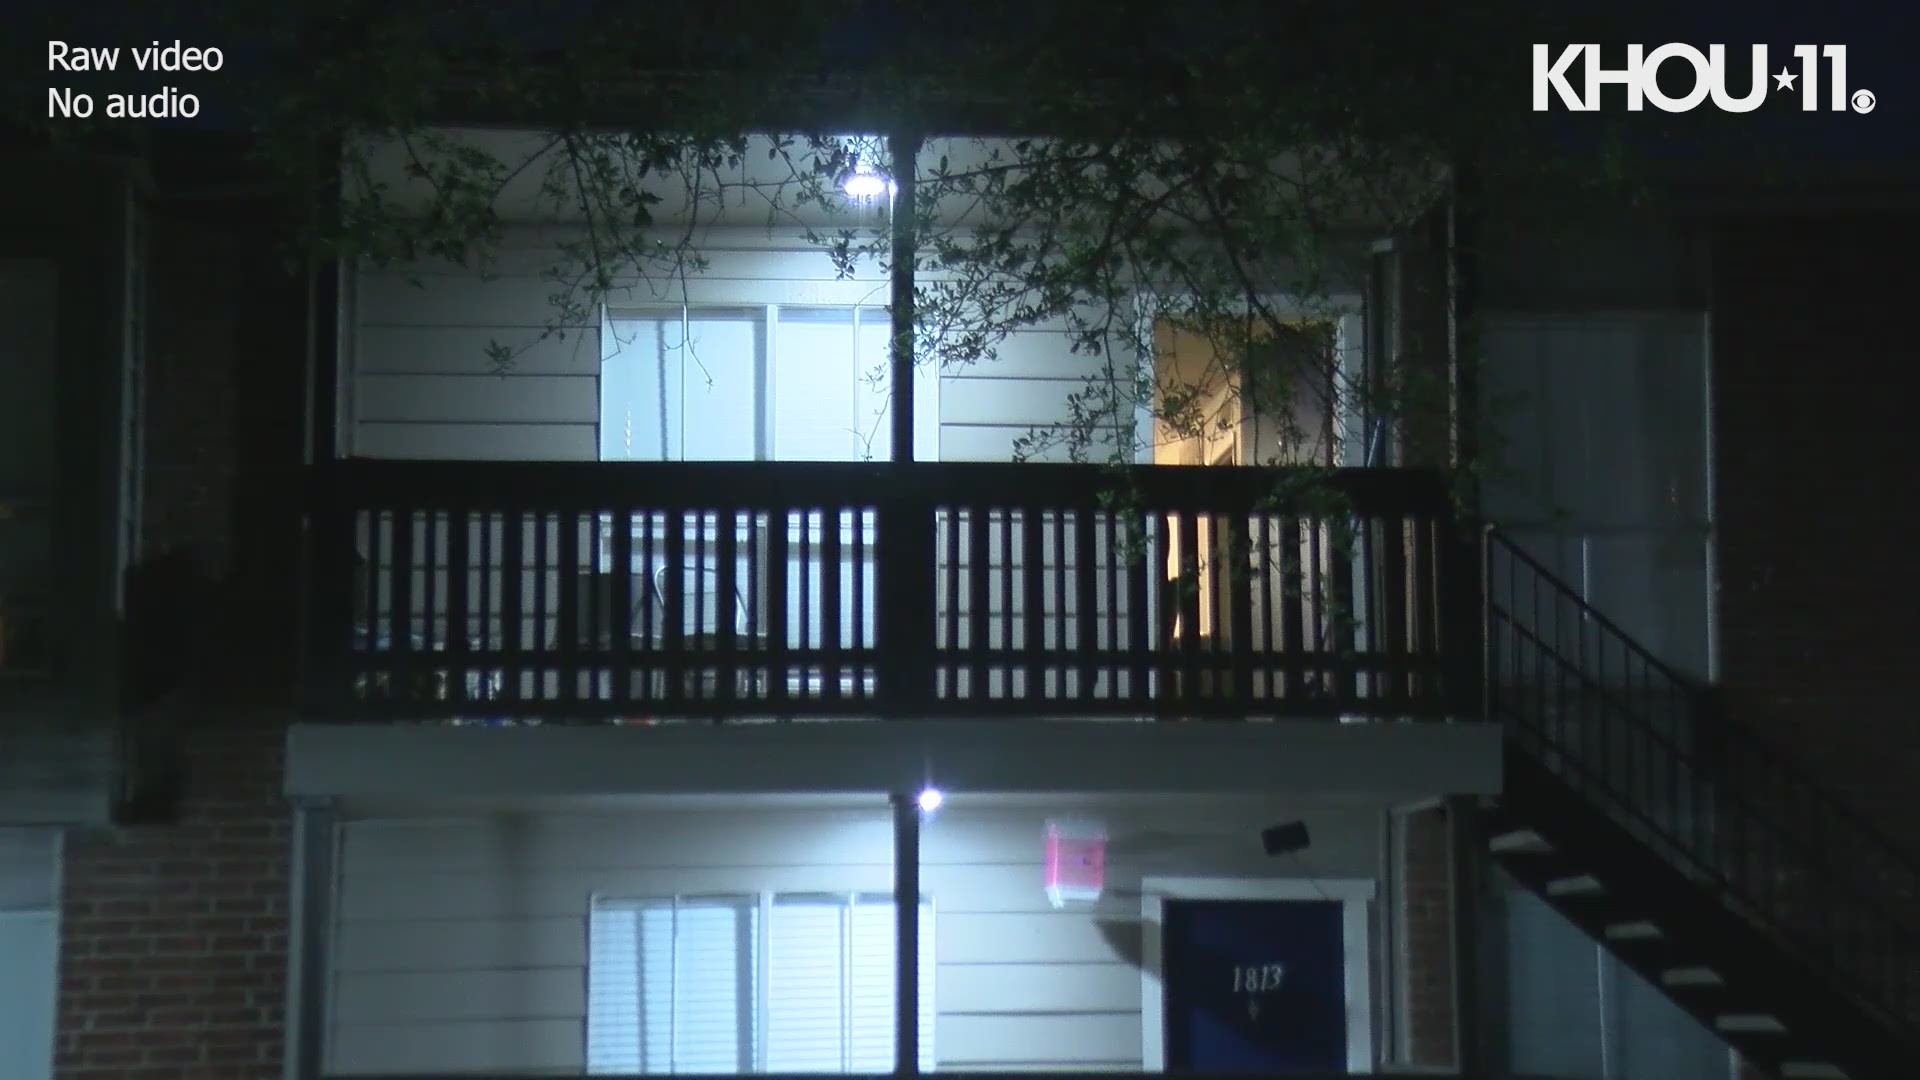 Around 11 p.m. March 31, 2020, Houston police said a 5-year-old child was shot at an apartment complex in the 8100 block of Richmond Avenue, near Hillcroft Avenue.